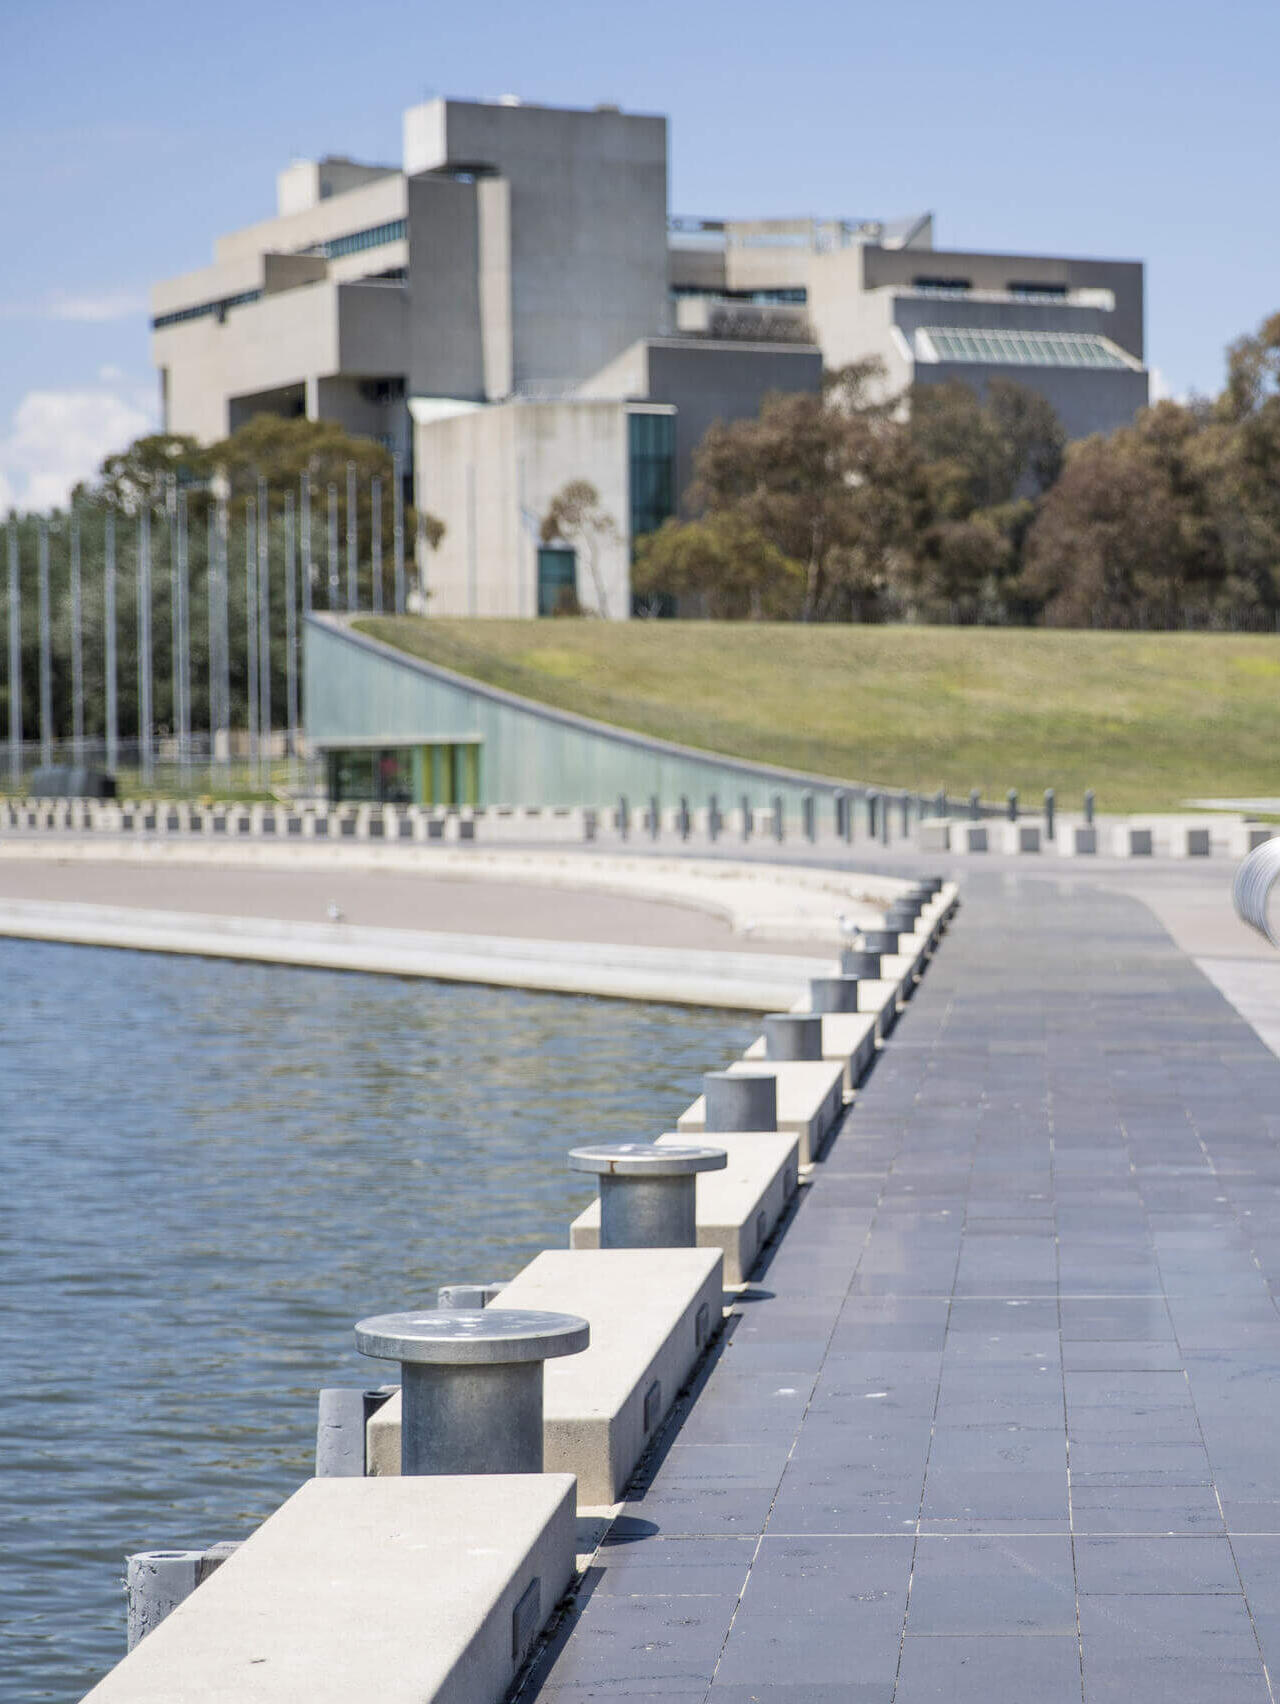 National Portrait Gallery in Canberra